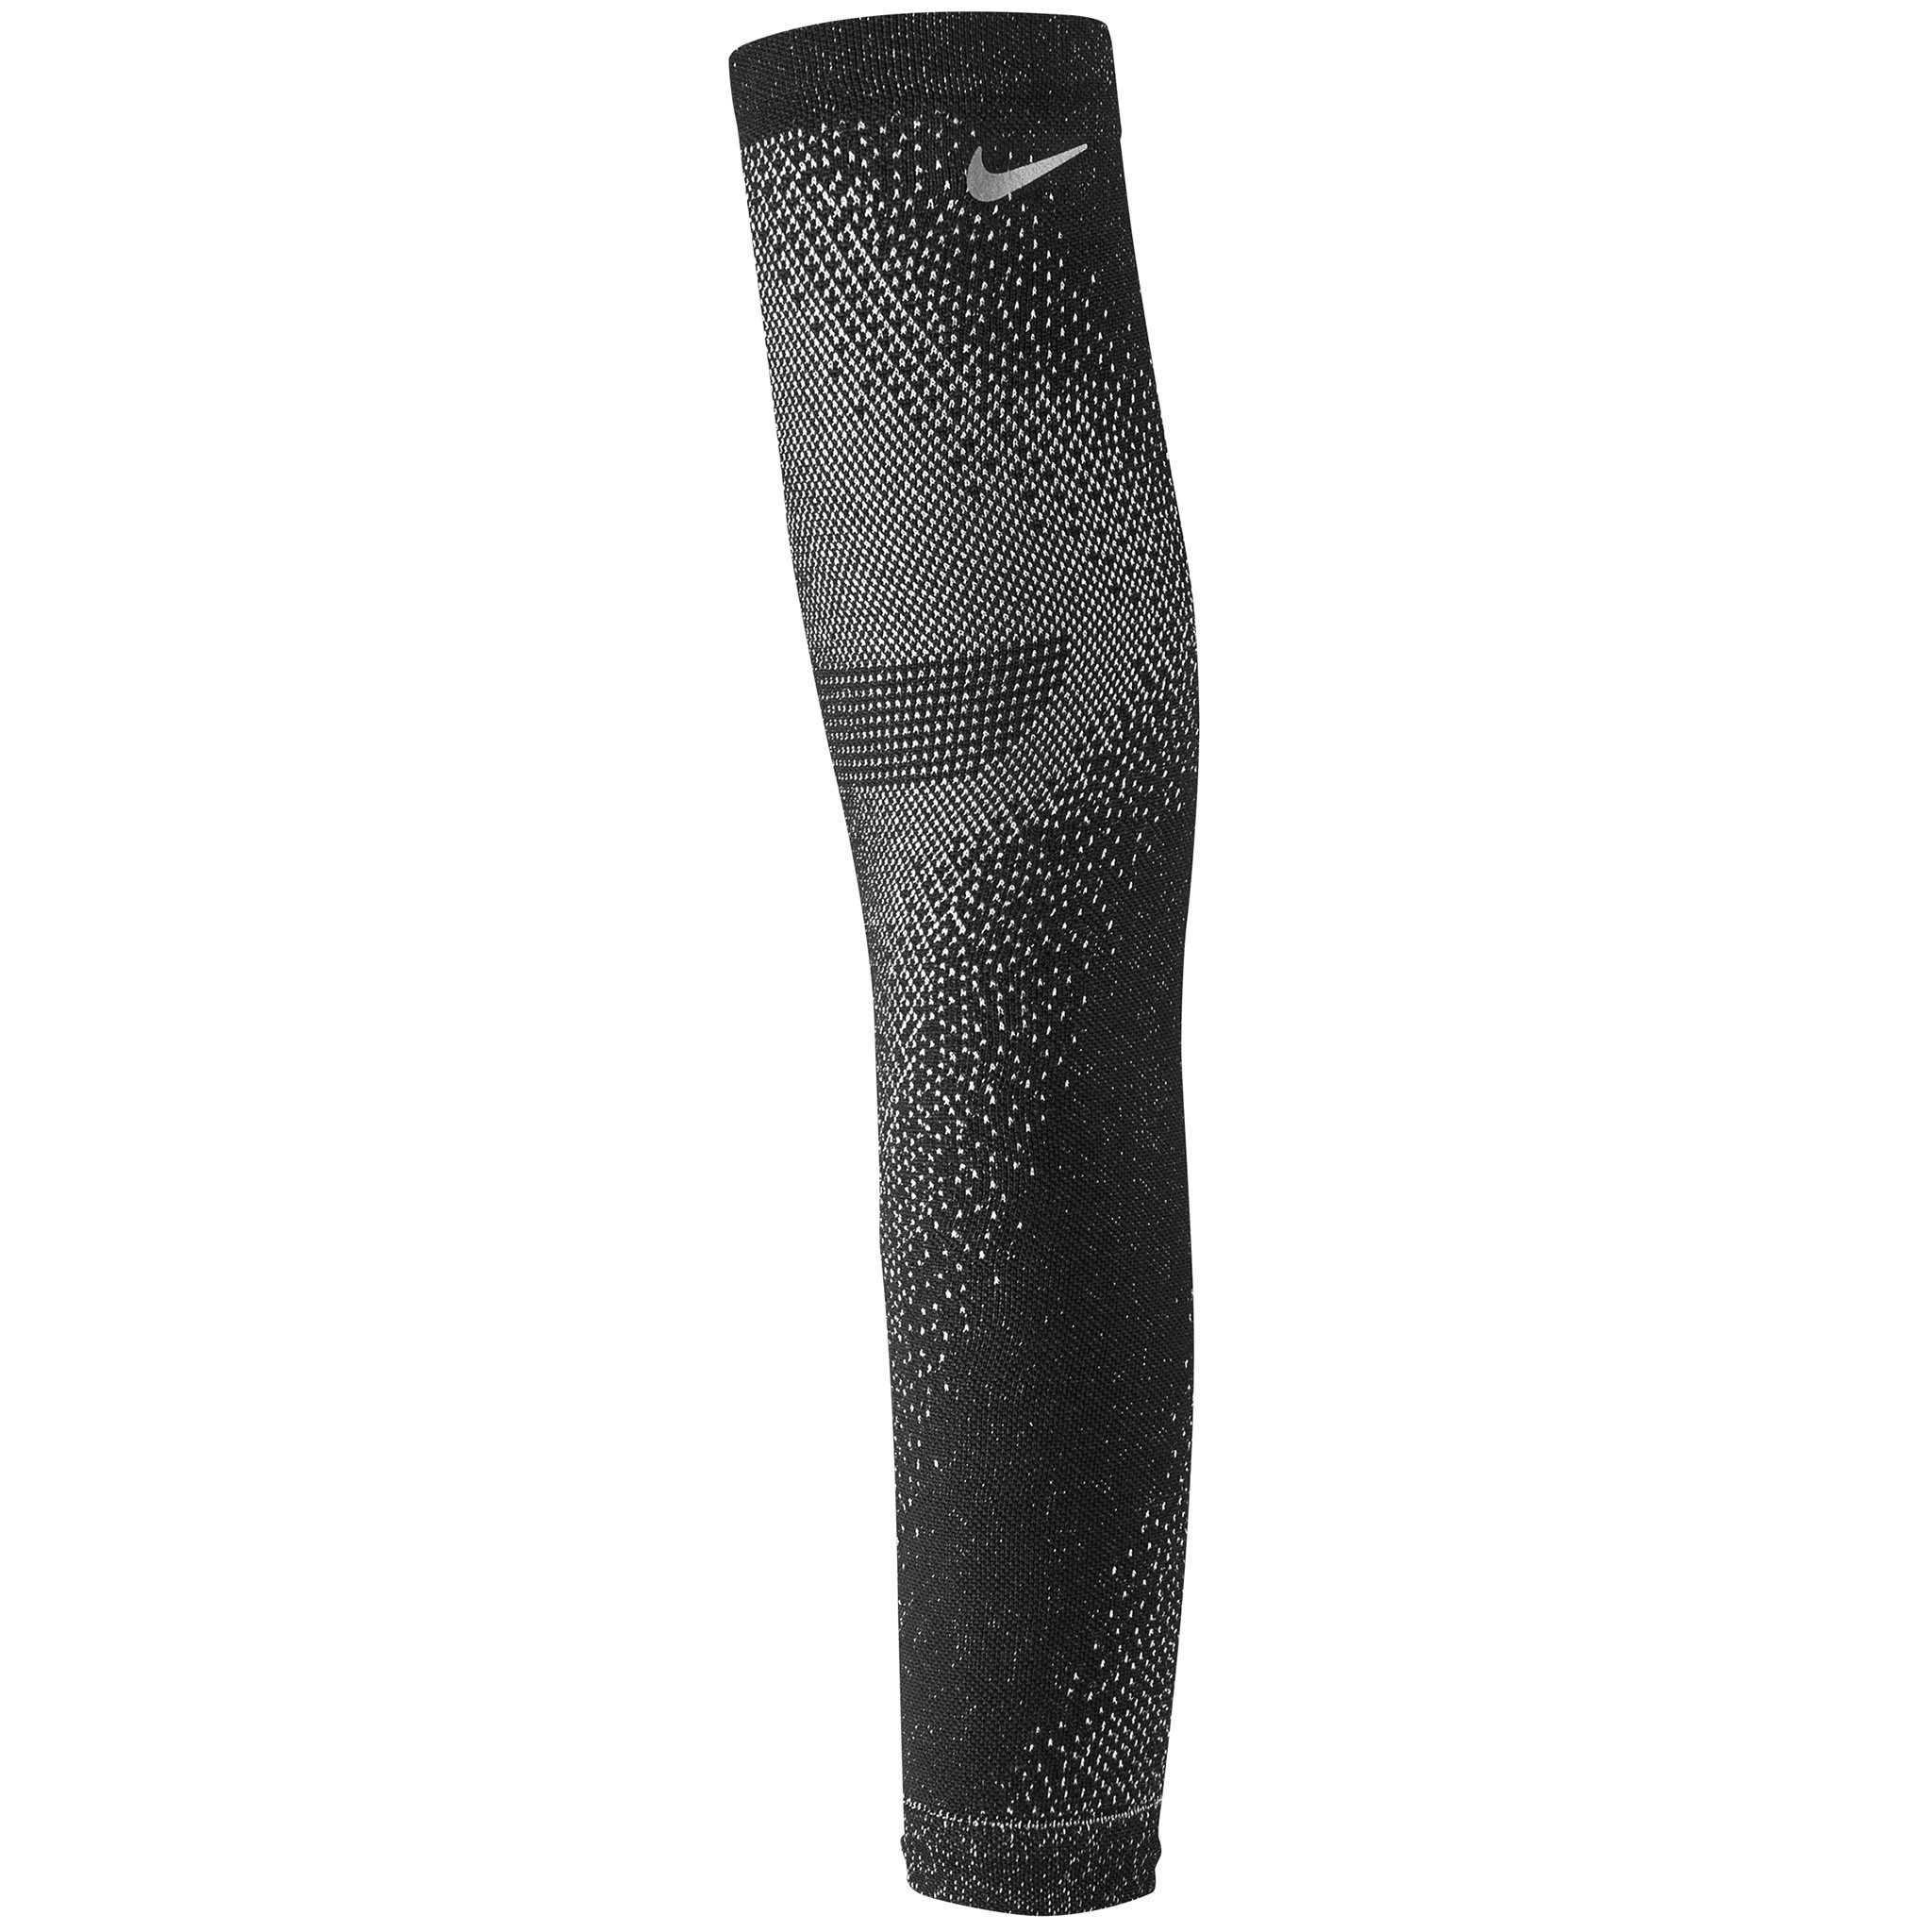 Nike Circular Knit Compression Arm Sleeves - The Sports Exchange